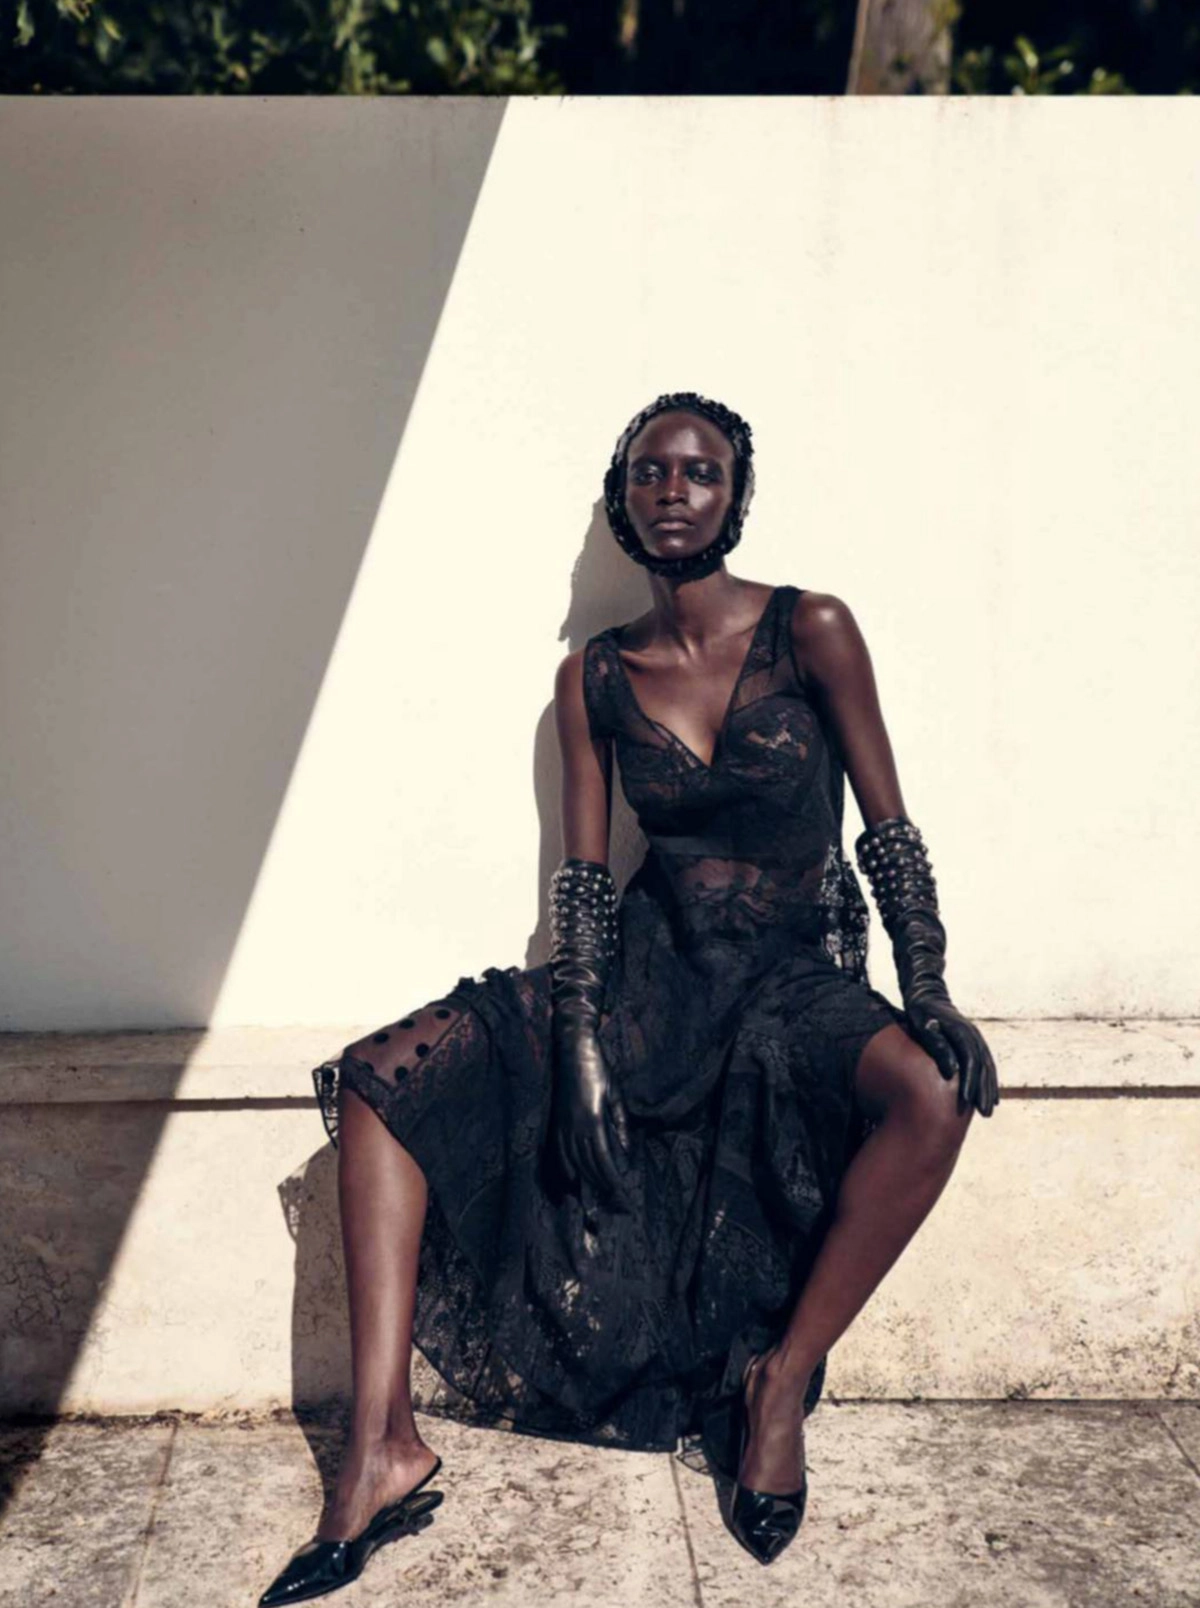 Oulimata Gueye covers Madame Figaro August 26th, 2022 by Thiemo Sander